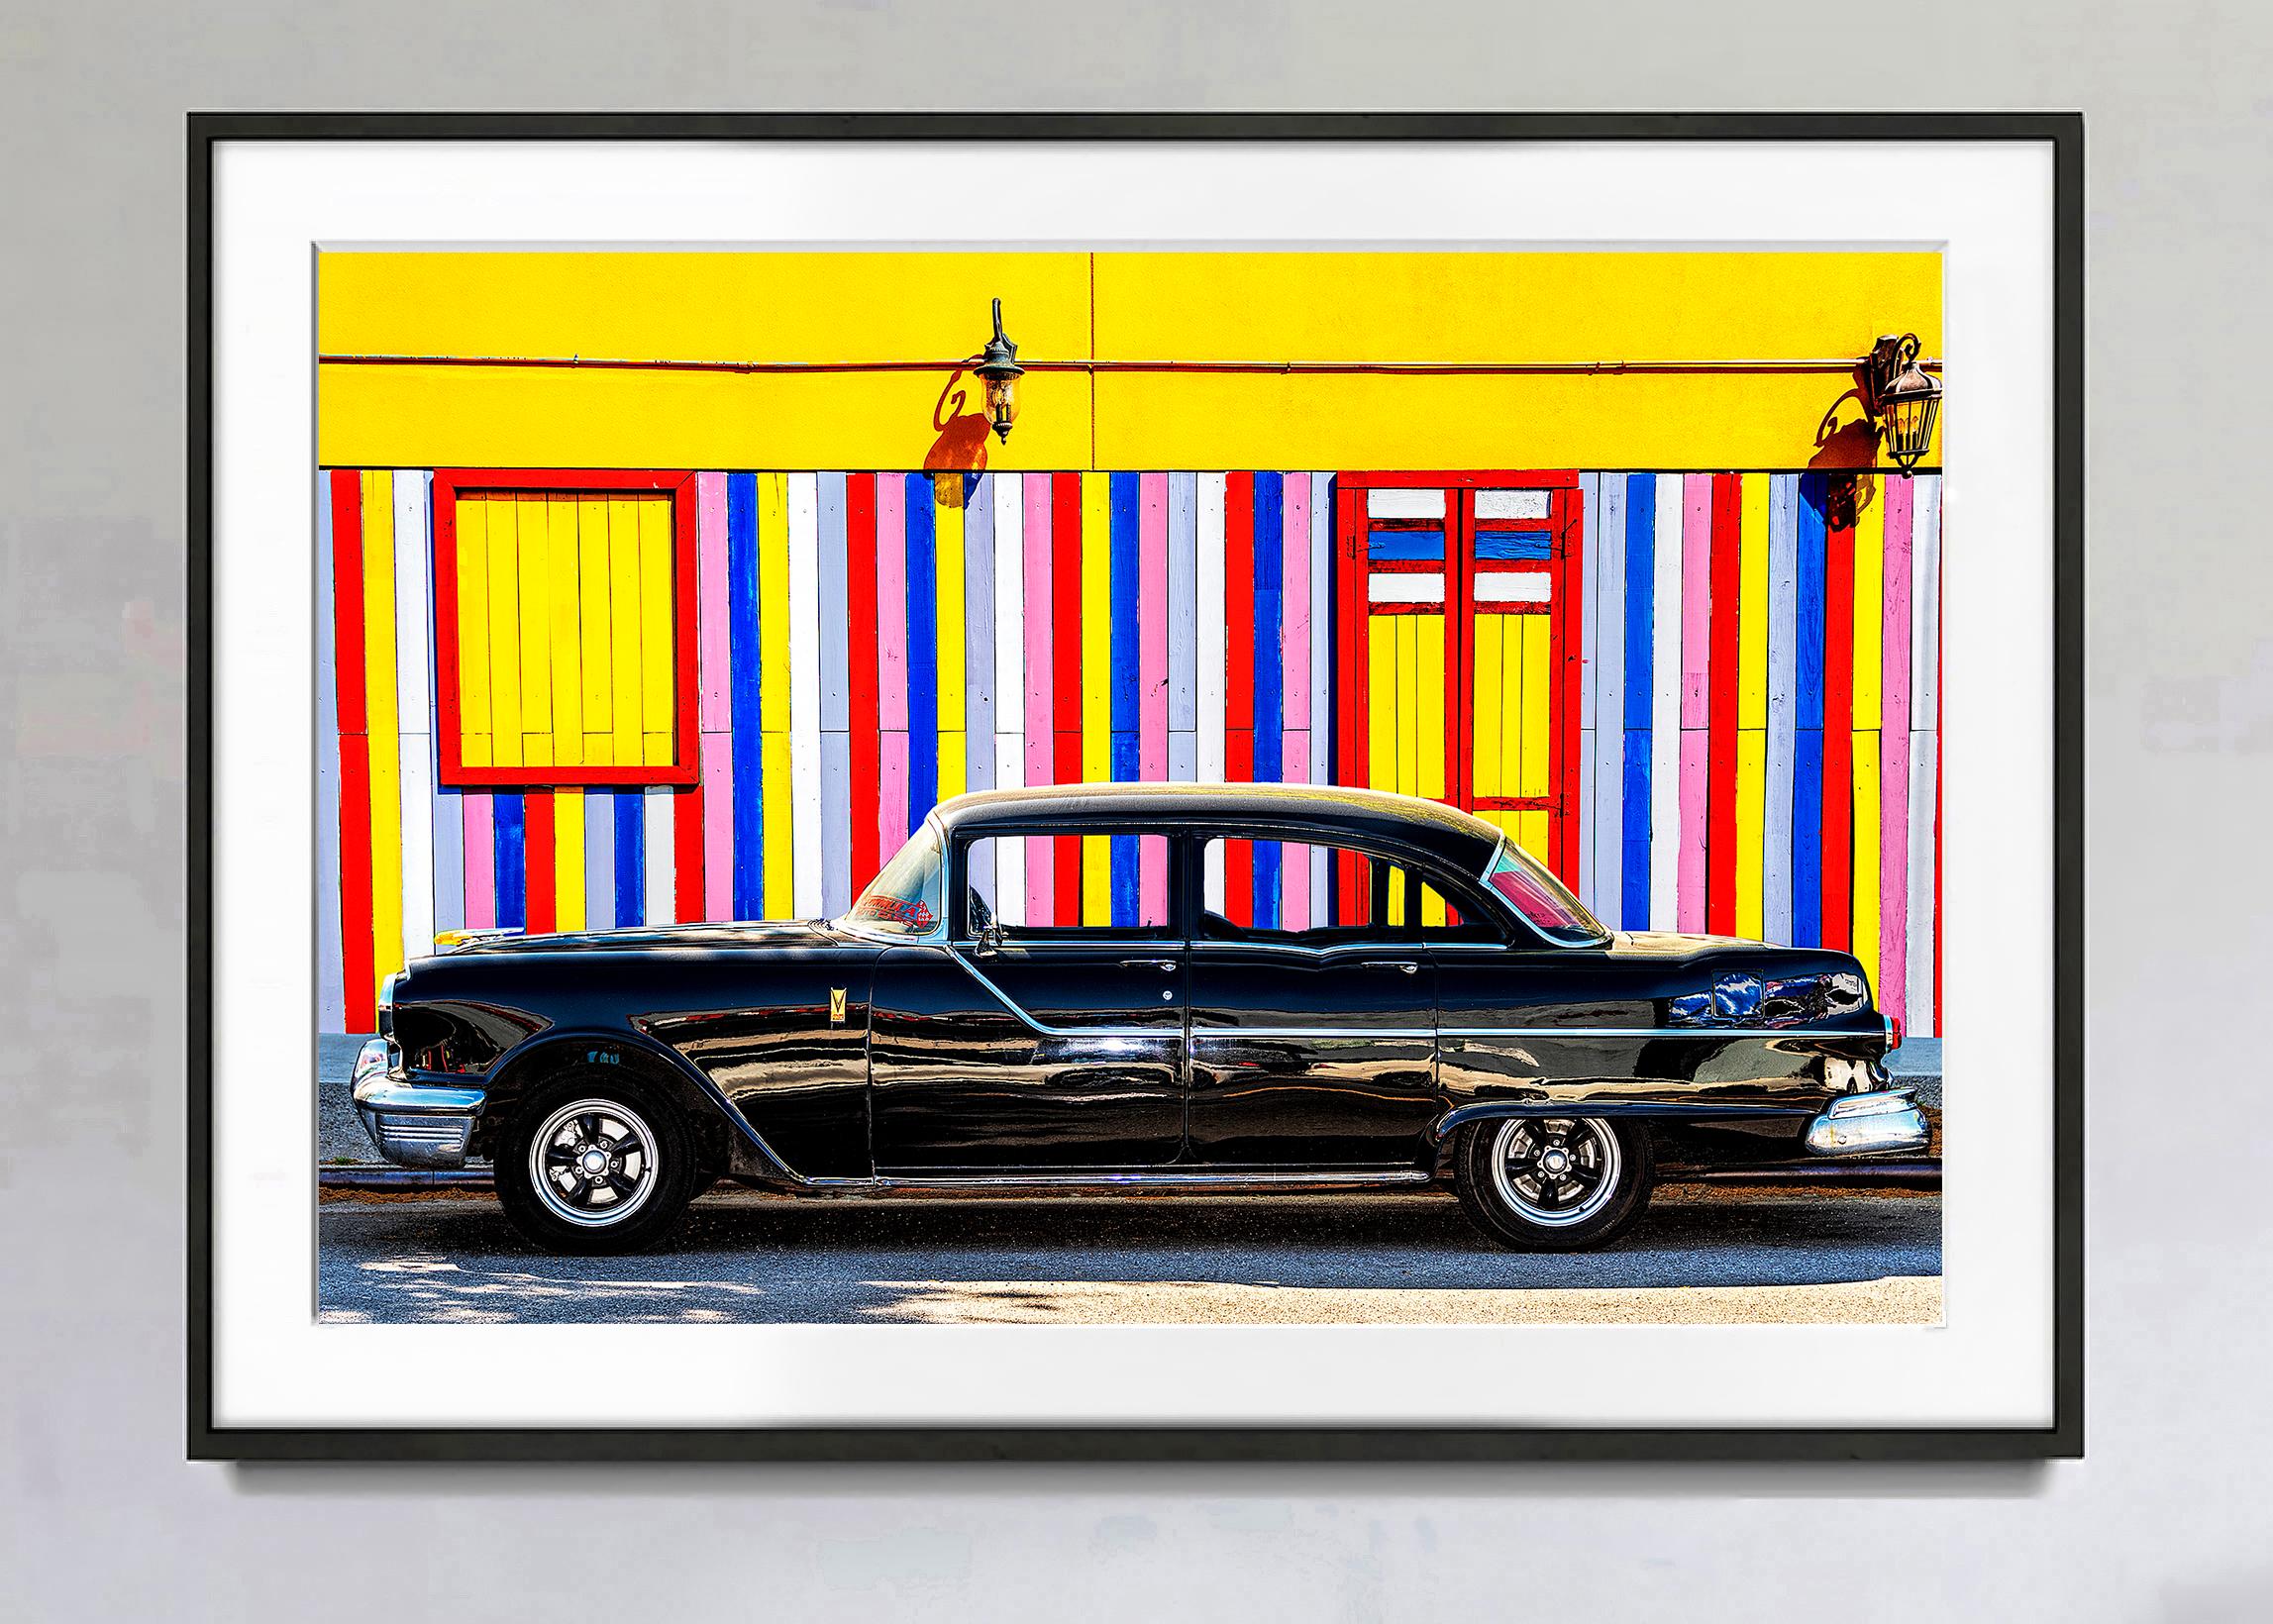 Vintage Car Against Colorful Striped  Yellow Wall   - Primary Colors - Photograph by Mitchell Funk